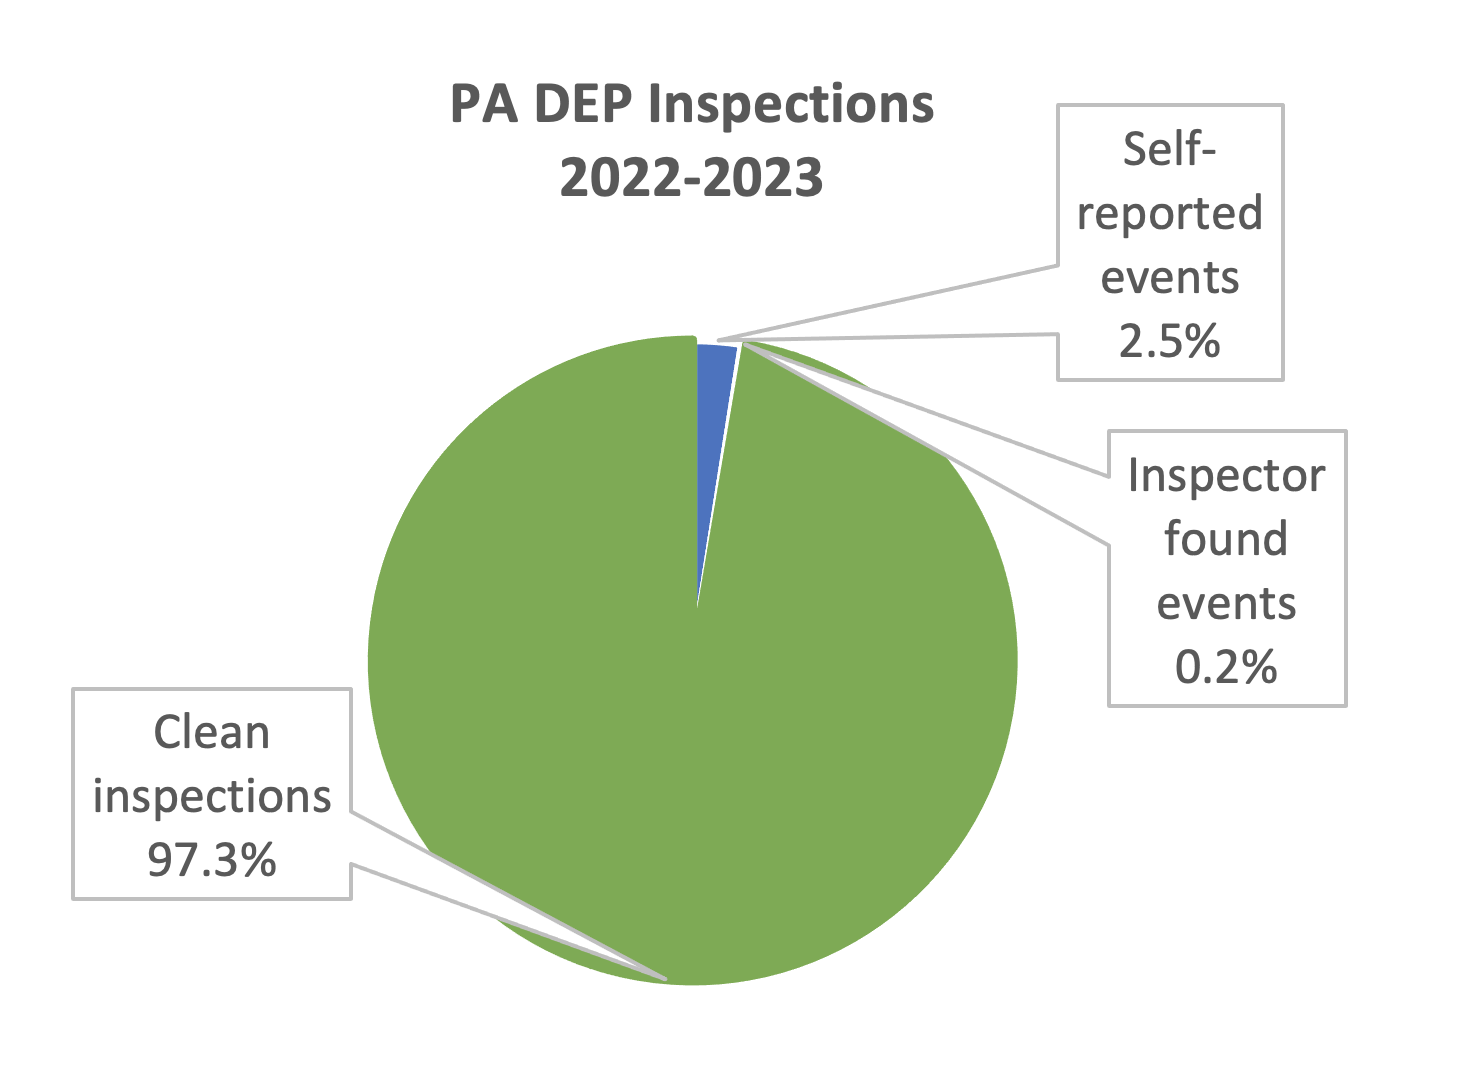 CNX received 969 inspections by the PA DEP during 2022–2023, of which 943 were clean, 24 were due to self-reported events, and 2 were events discovered by inspectors.